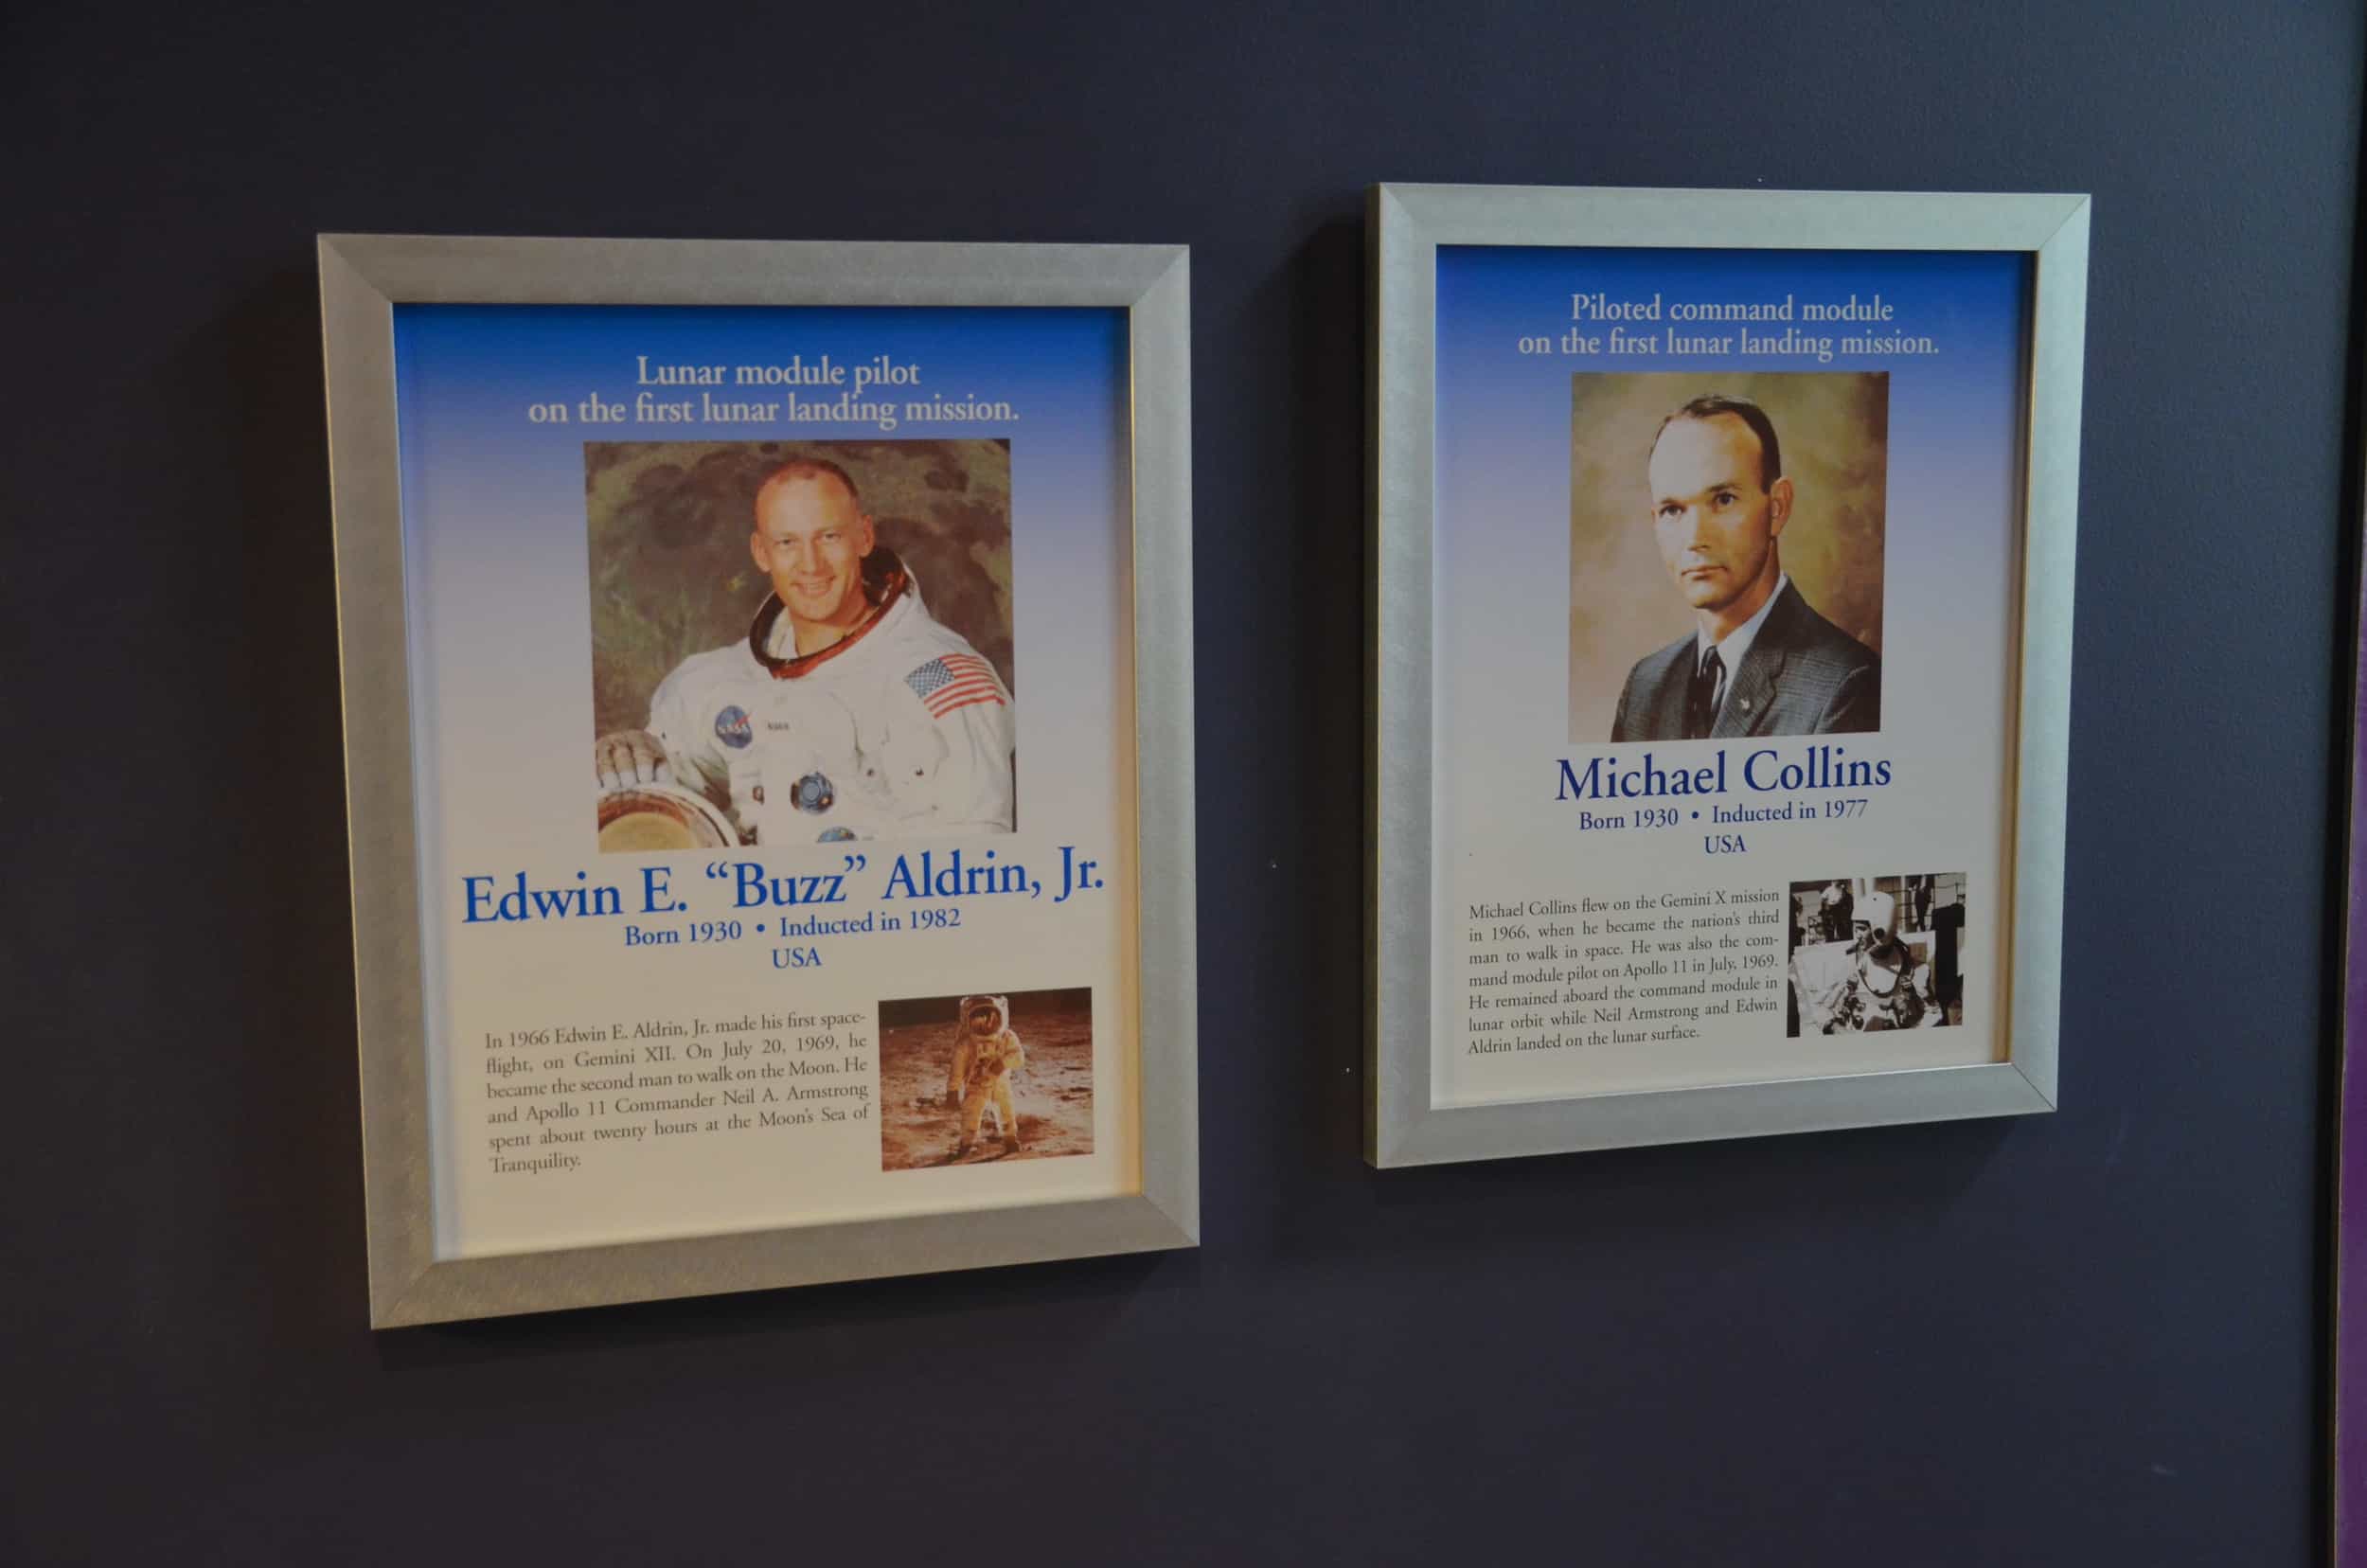 Buzz Aldrin and Michael Collins (1930-2021) in the International Space Hall of Fame at the New Mexico Museum of Space History in Alamogordo, New Mexico